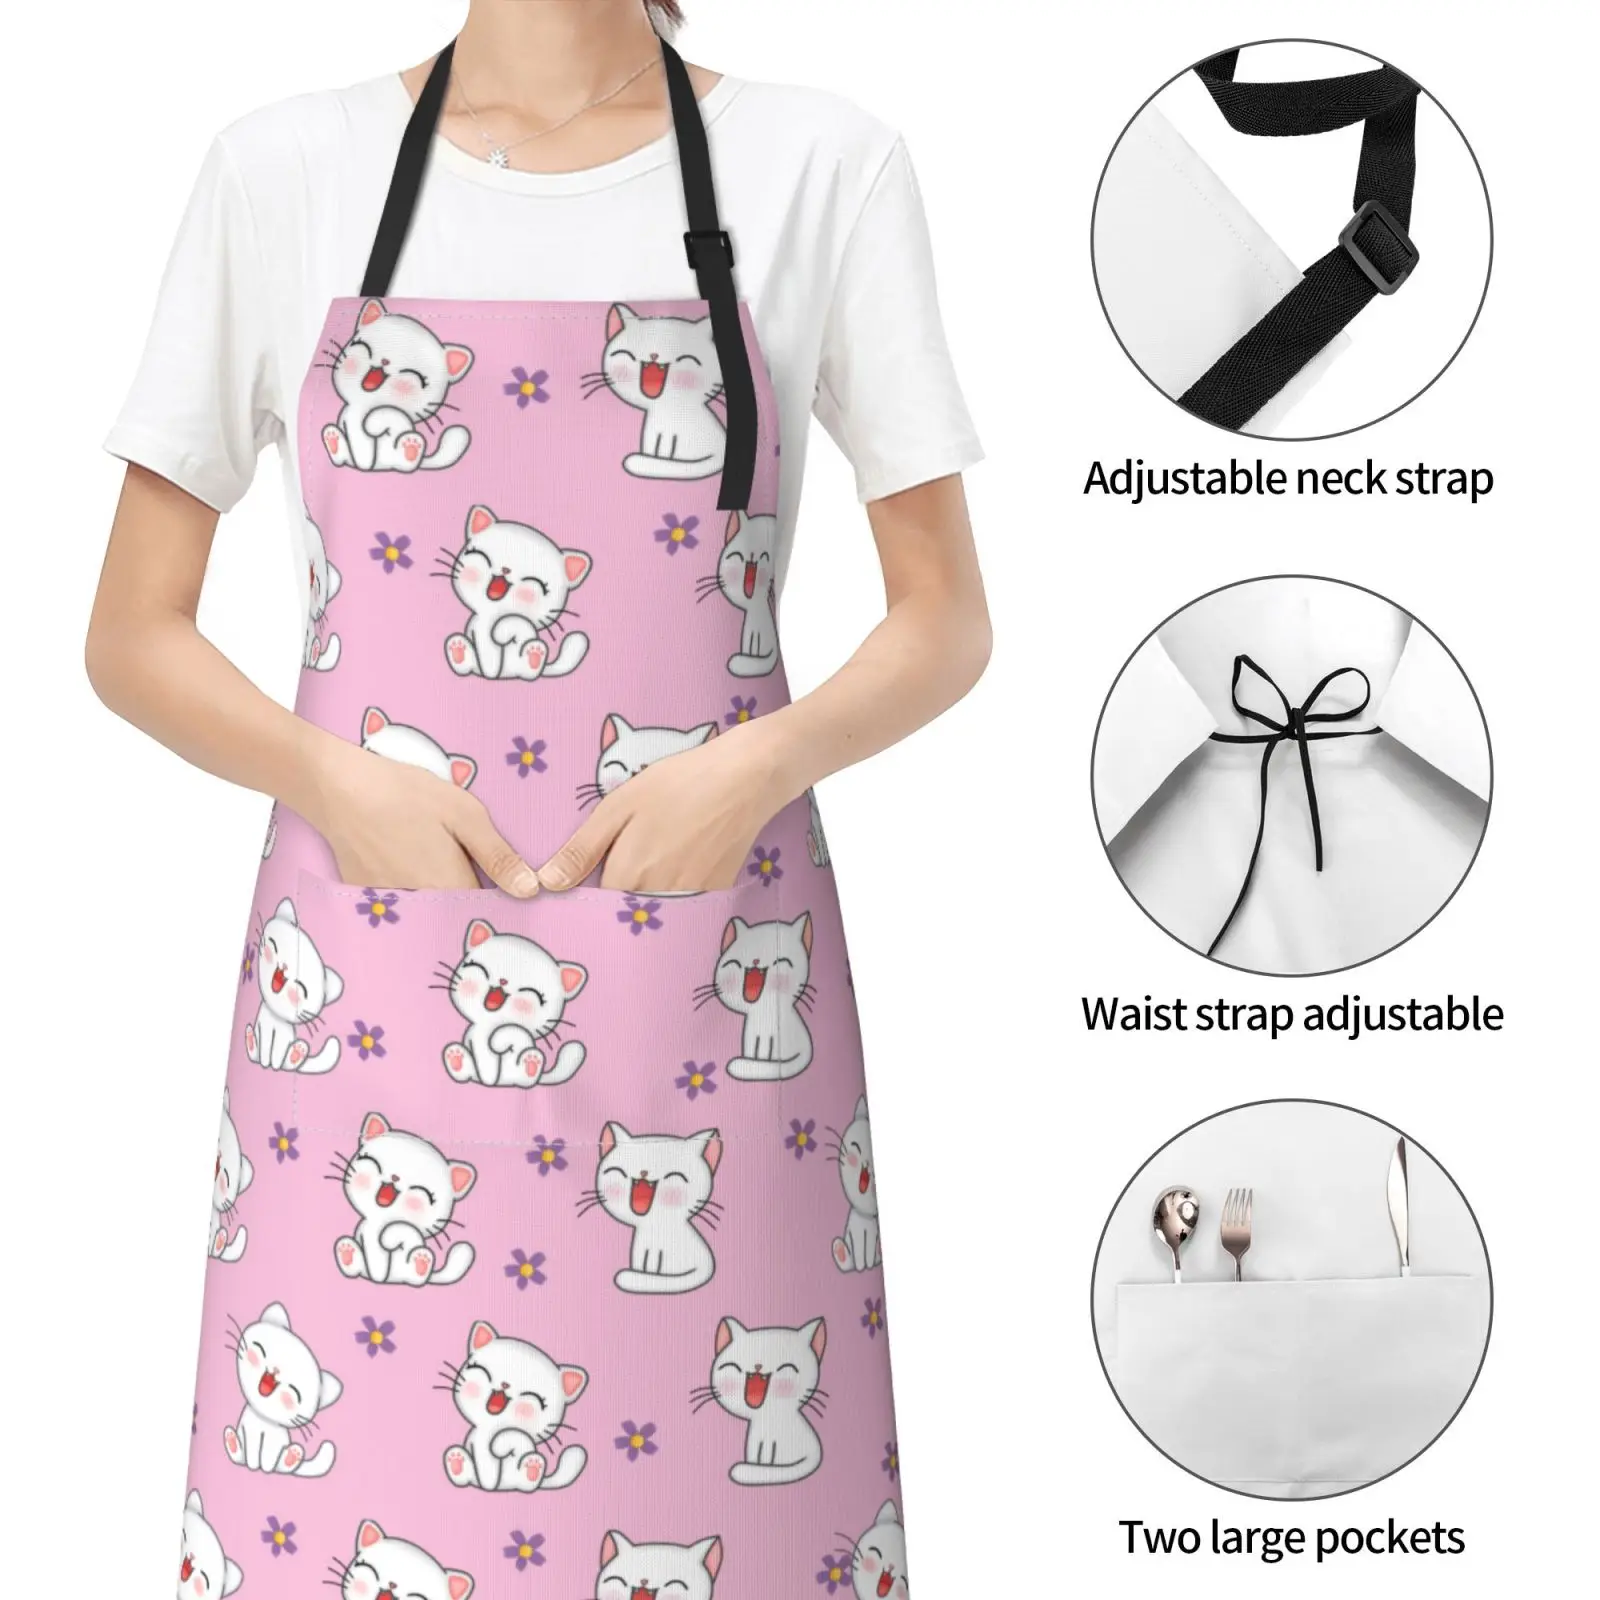 Cute Cats Apron, Funny Aprons with 2 Pockets for Women Adjustable Neck Waterproof Stain Resistant Cooking Gardening Nail Salon